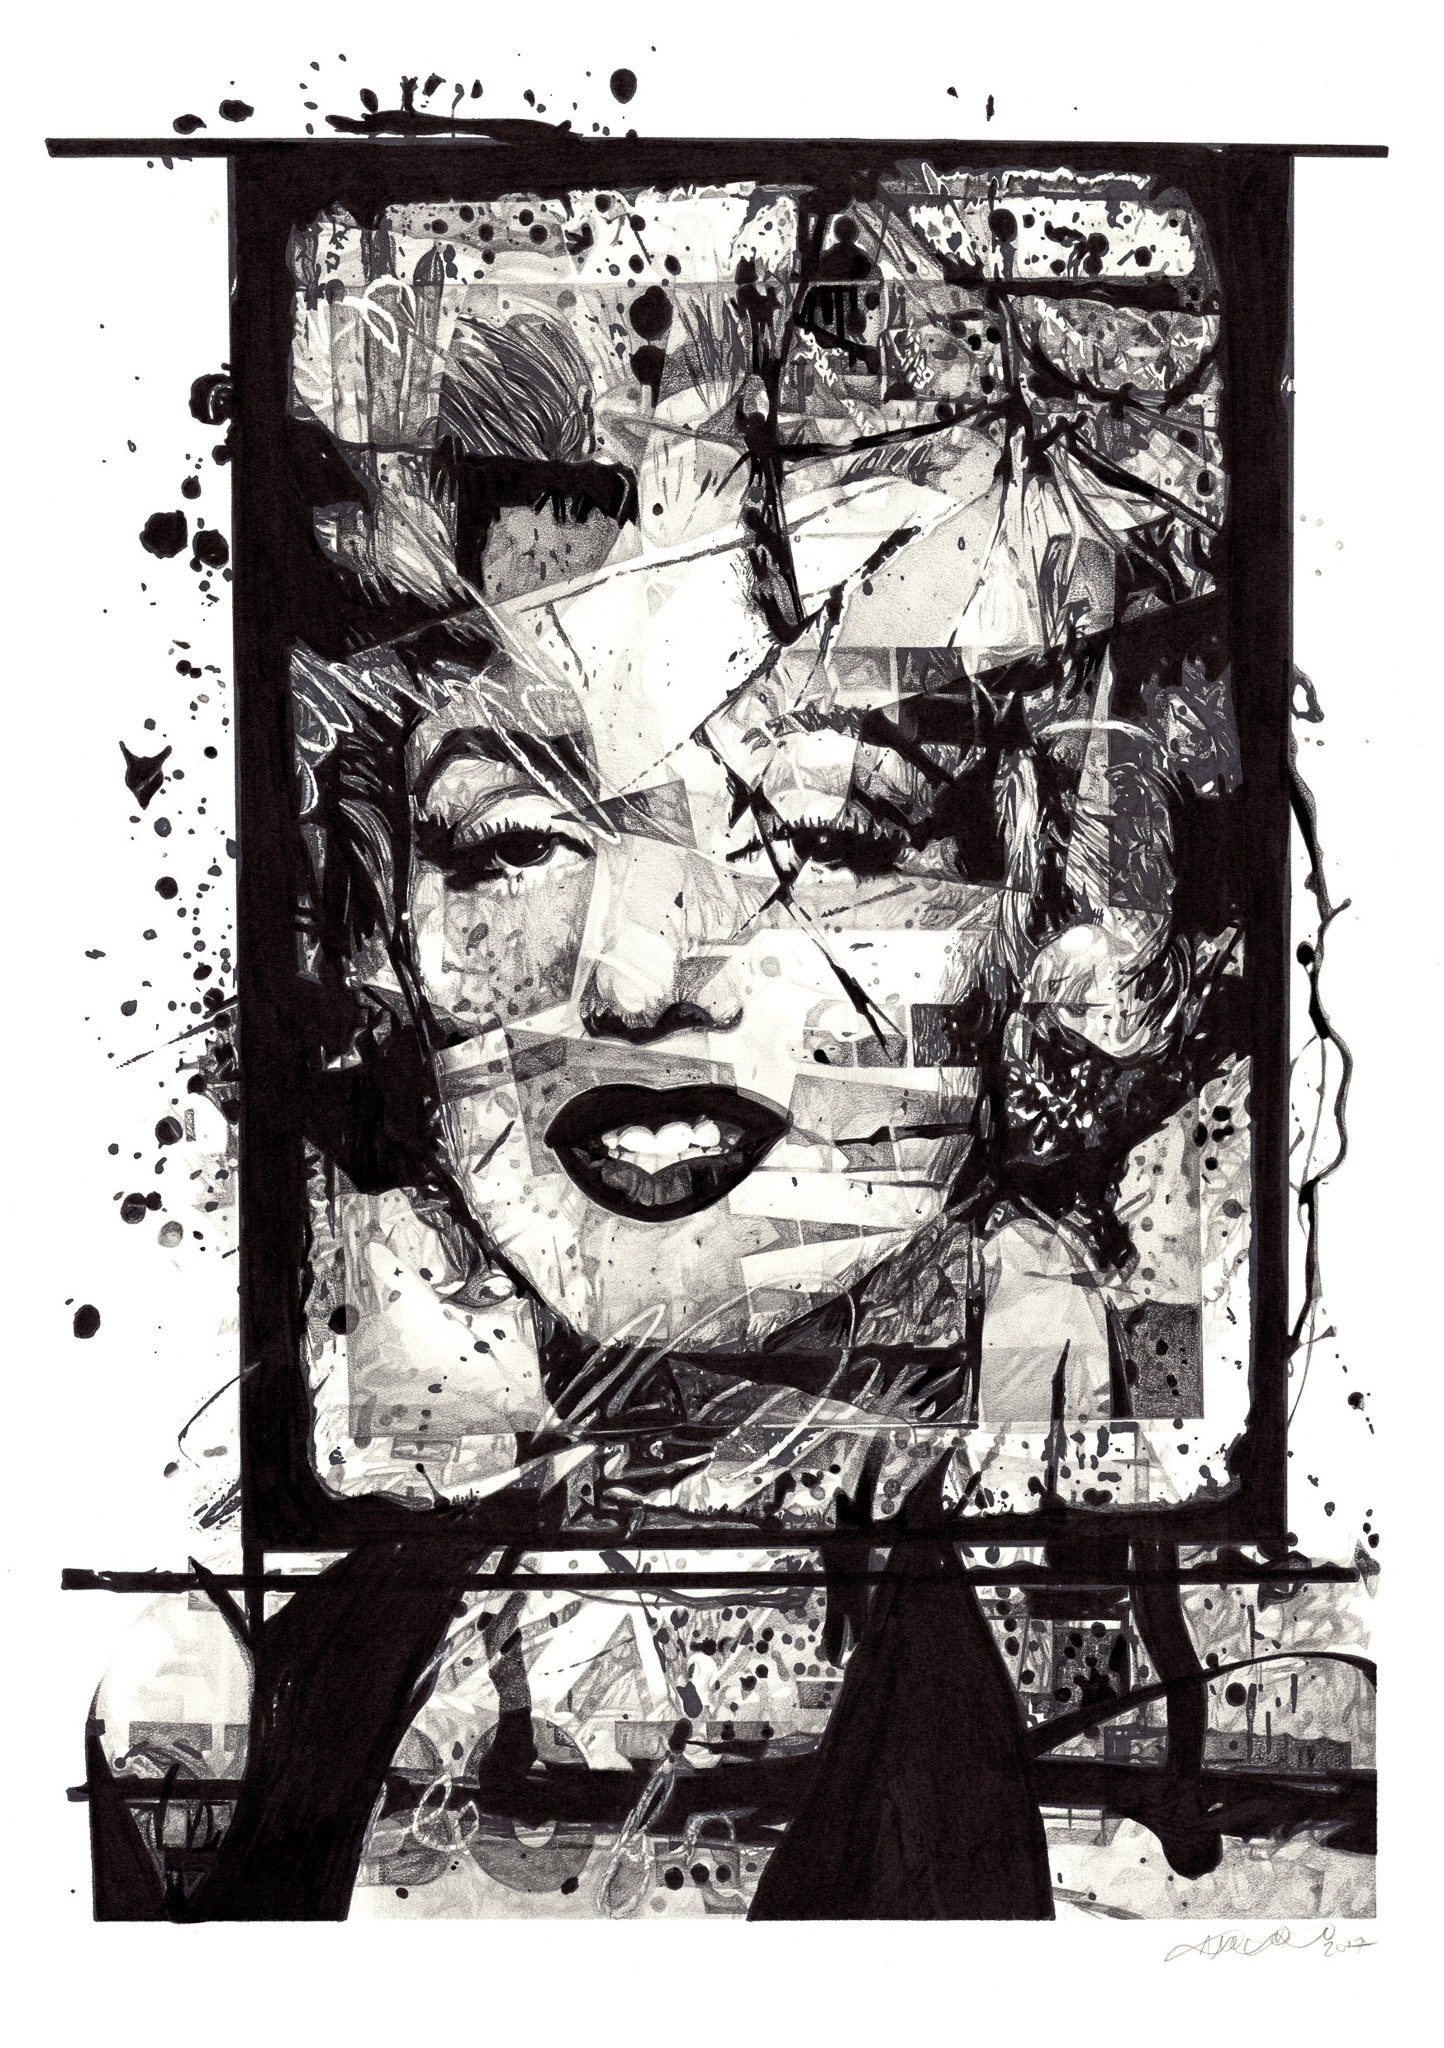 The Wick - MARILYN - Pencil and pen on paper - 73cm x 55cm, by Nigel Stefani, courtesy of the artist